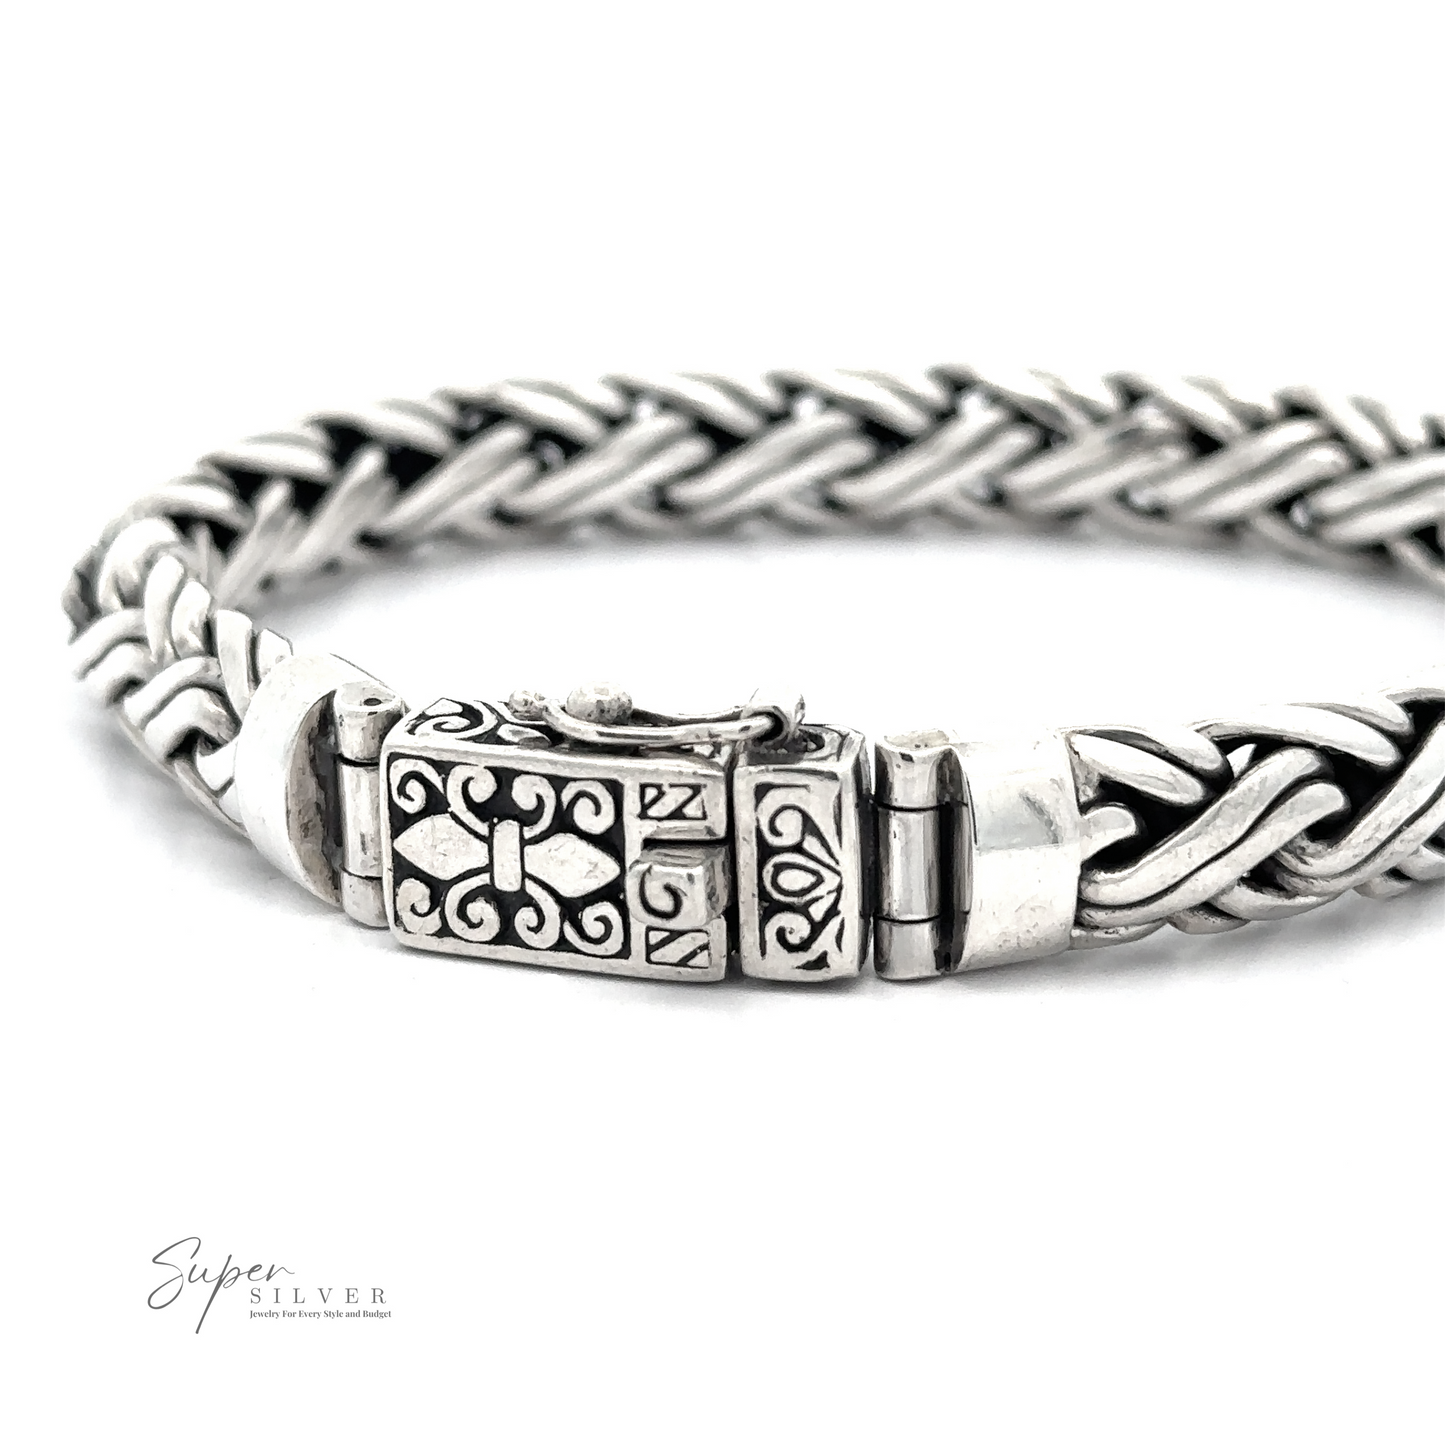 Intricately woven Heavy Double Strand Braided Bracelet with detailed clasp and design elements. This heavy braided bracelet is a true statement piece. Logo in the bottom left corner reads "Super Silver".